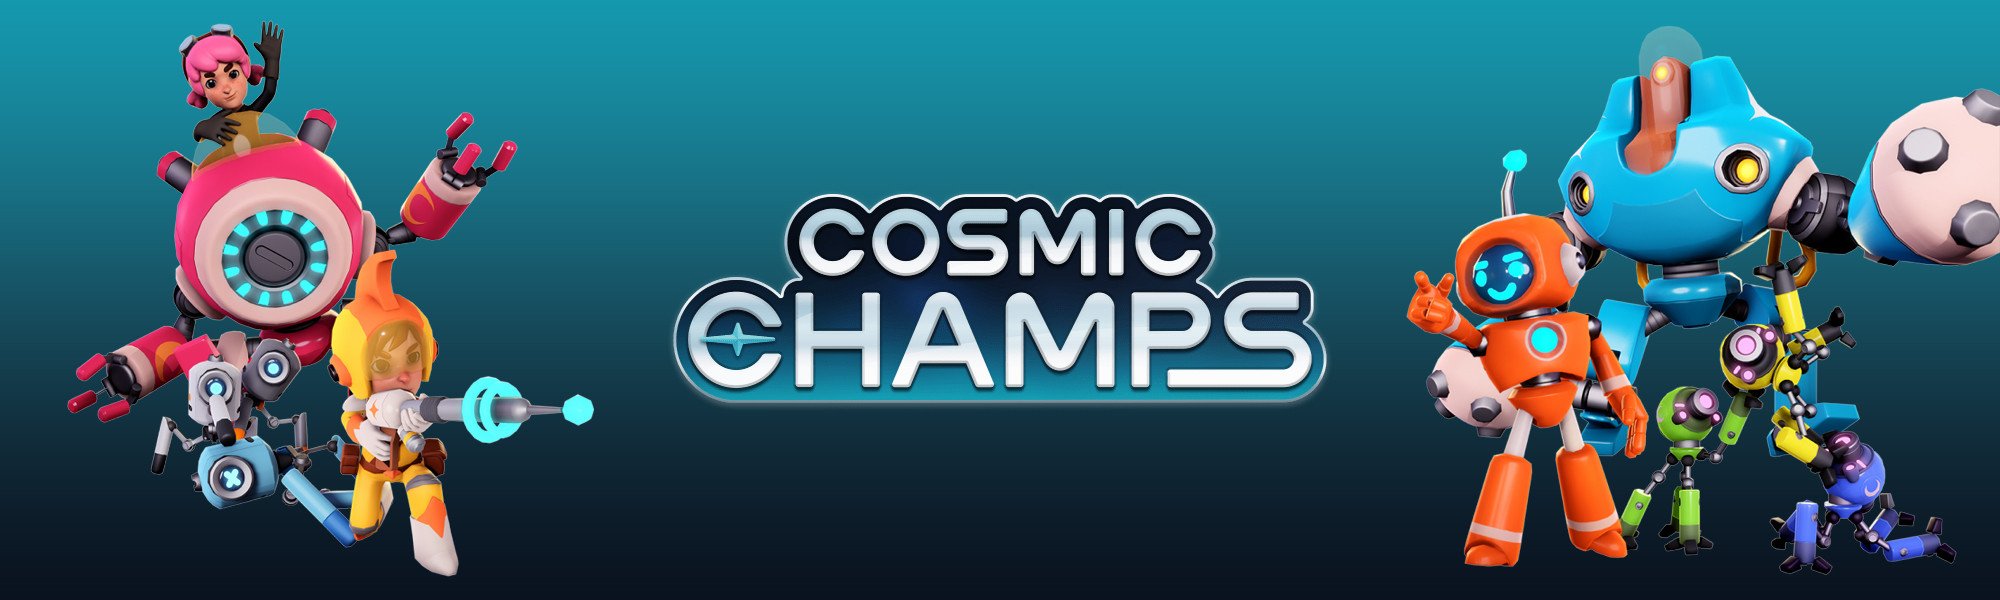 Cosmic Champs banner